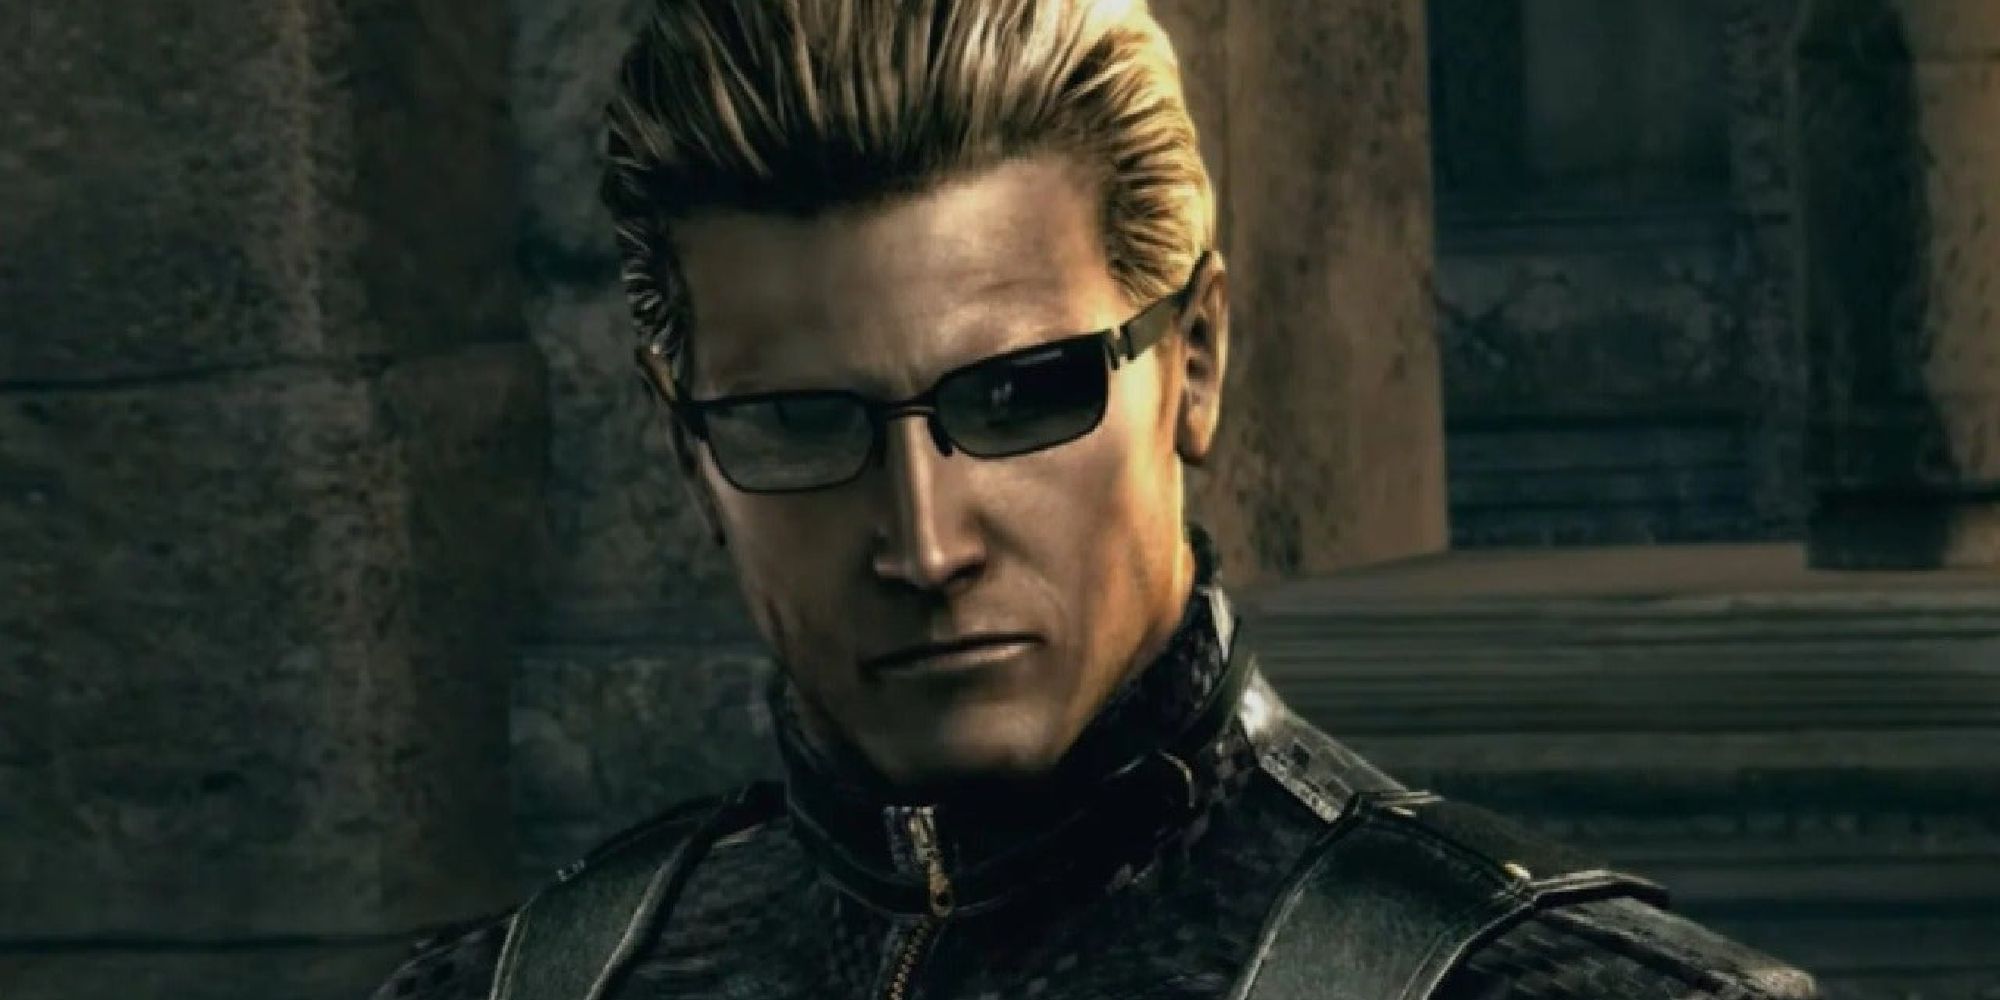 Wesker as shown in RE5, looking to the side through his glasses.